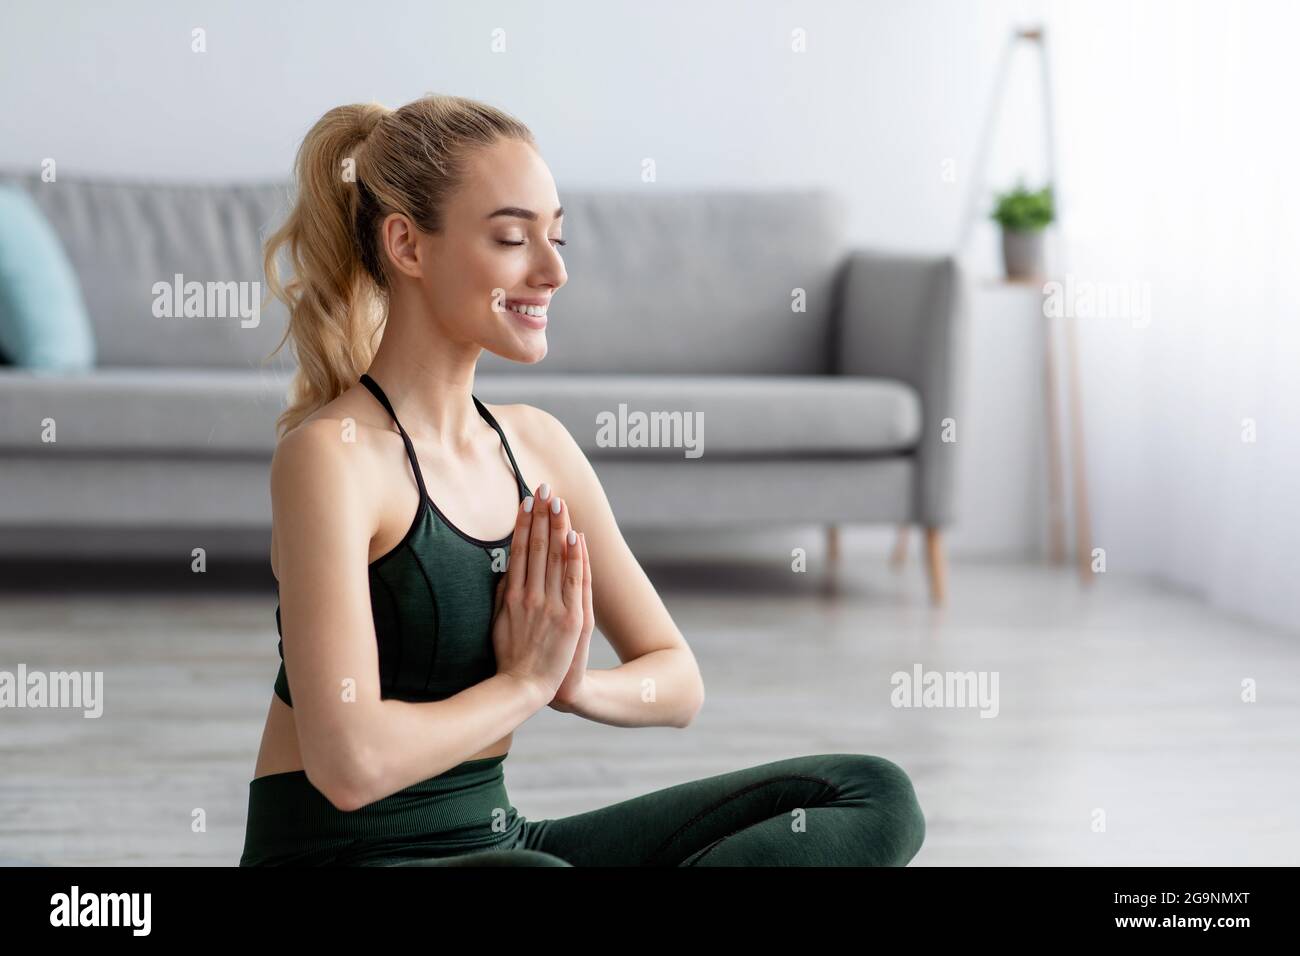 Sport for beginners. Woman practicing yoga lesson, breathing, meditation, exercises Stock Photo